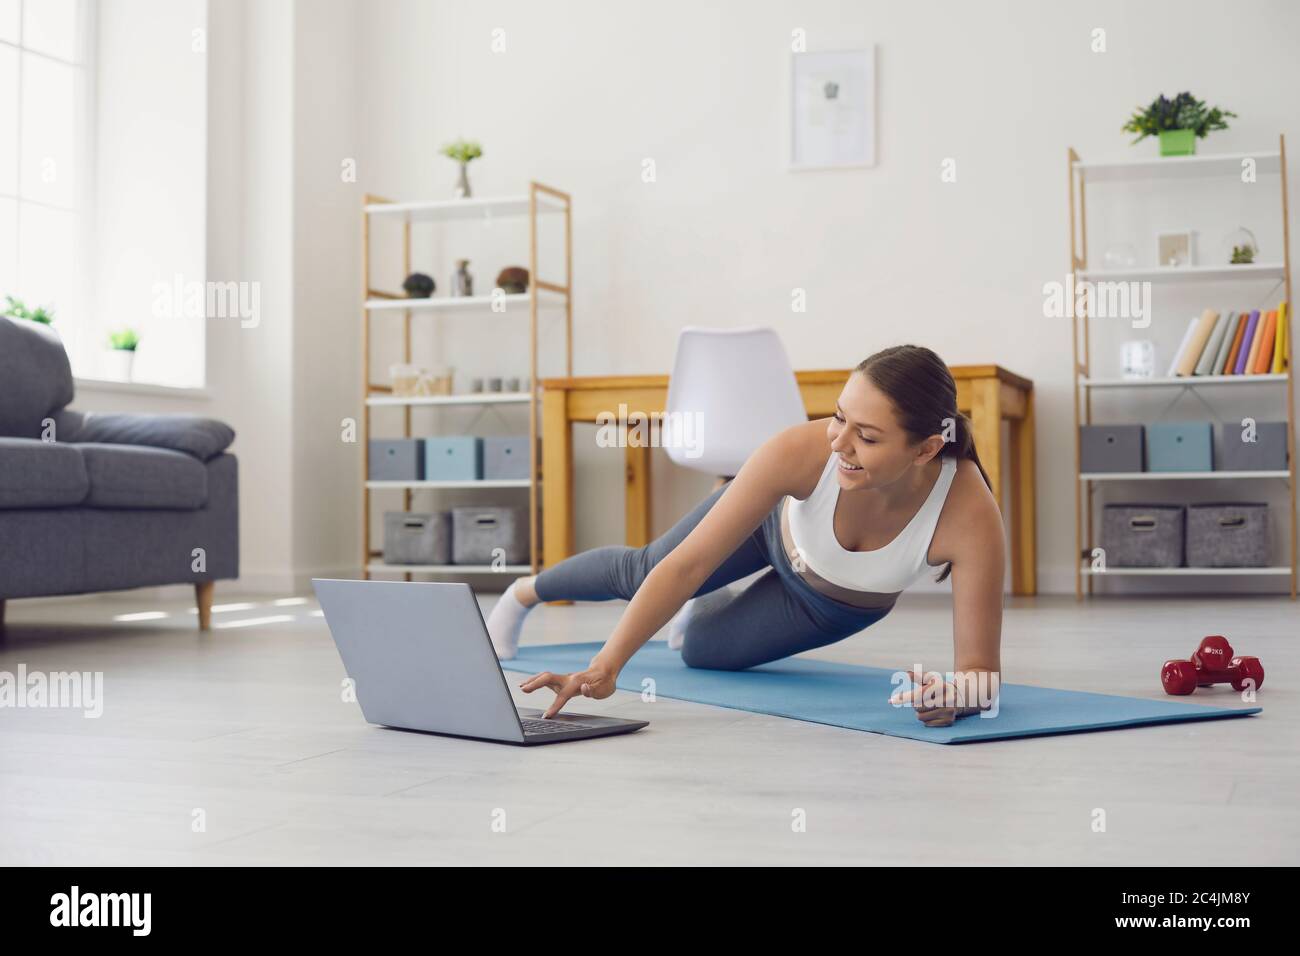 Online home fitness. Woman with laptop training to web video tutorial. Personal trainer giving yoga class via internet Stock Photo